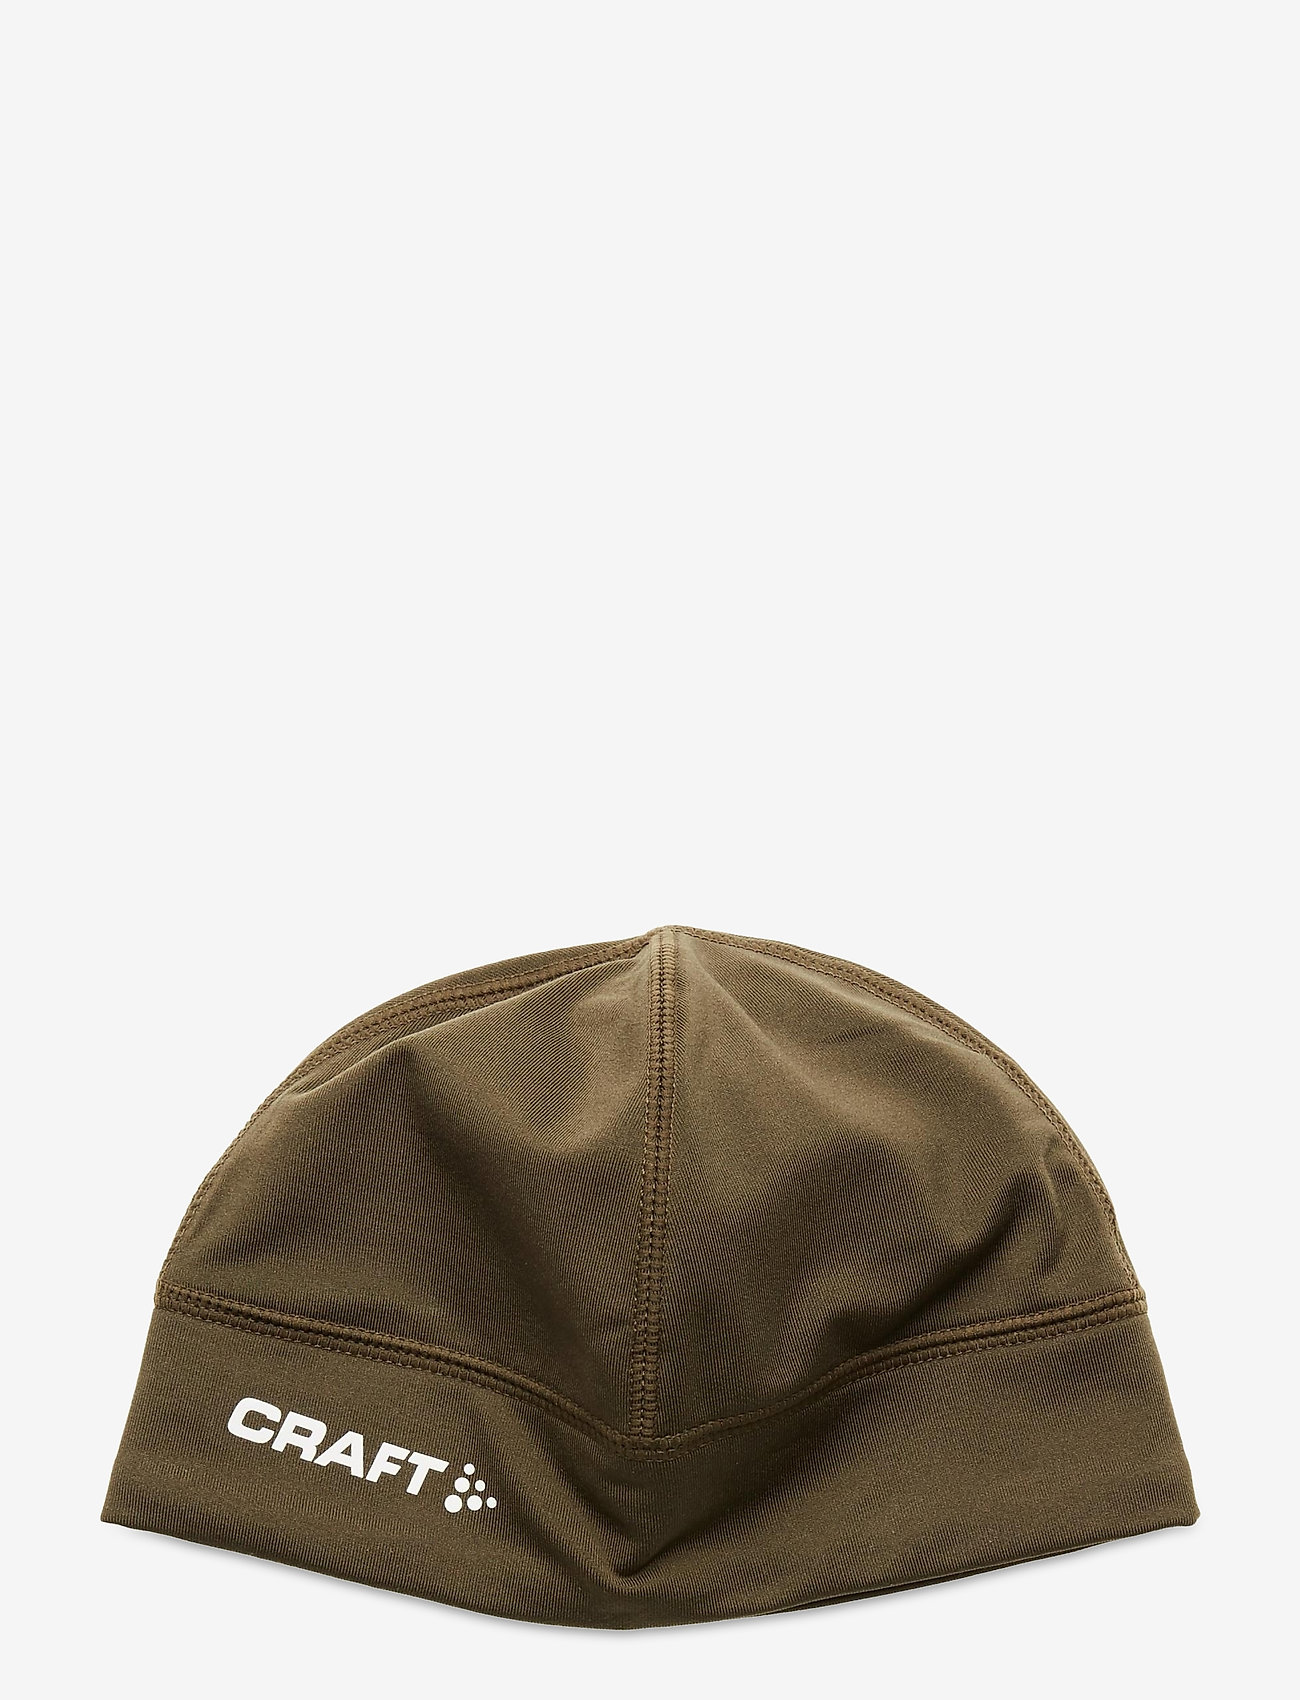 Craft - Light thermal hat - lowest prices - dk olive - 1